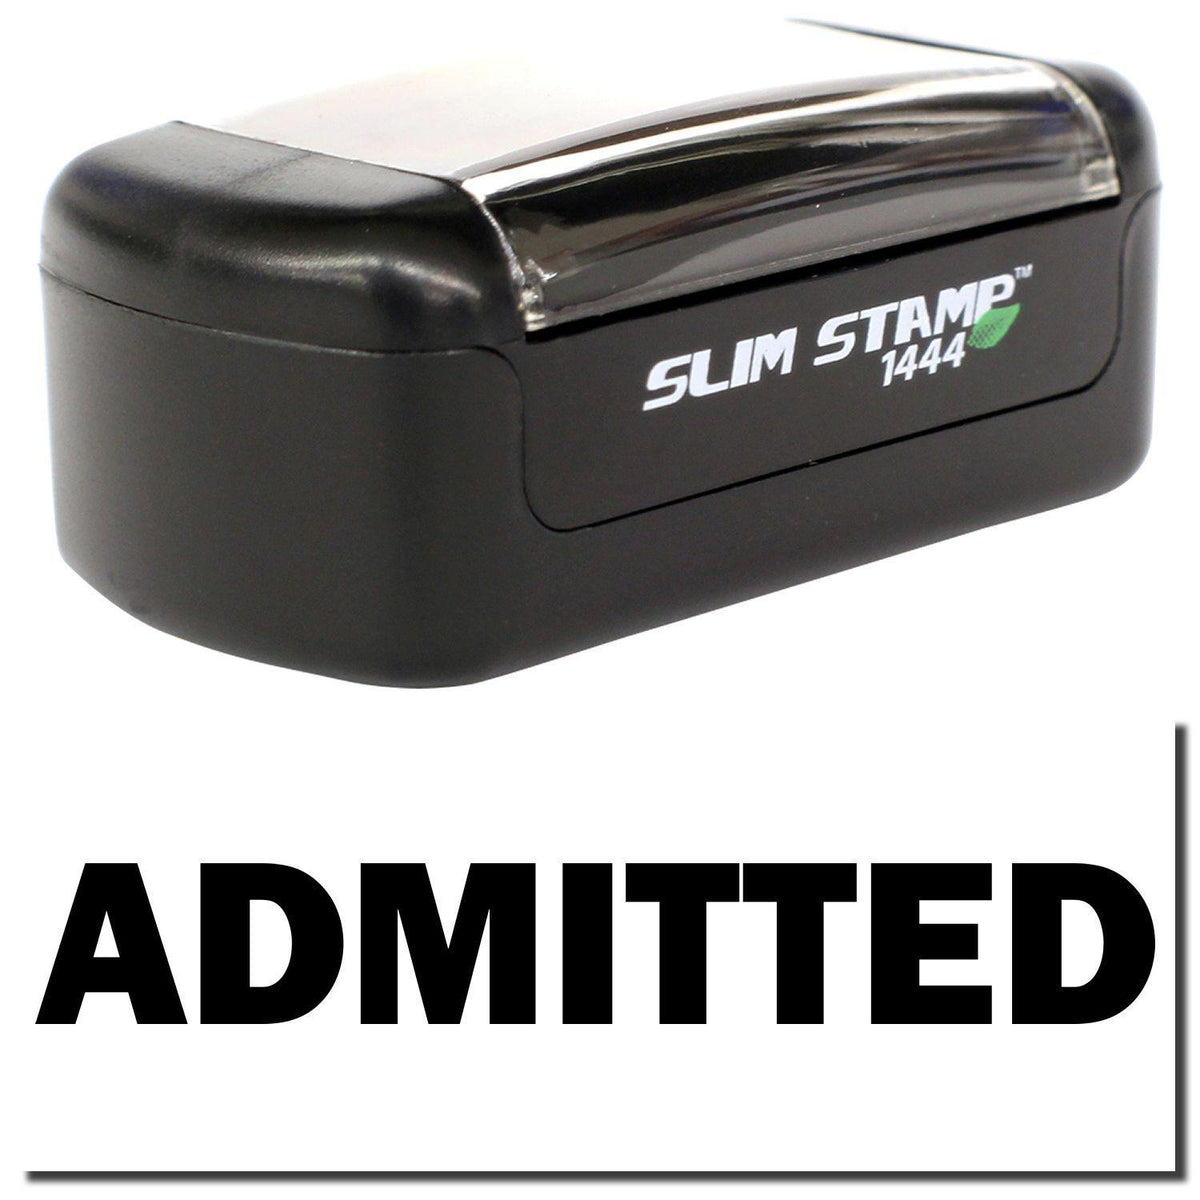 A stock office pre-inked stamp with a stamped image showing how the text &quot;ADMITTED&quot; is displayed after stamping.